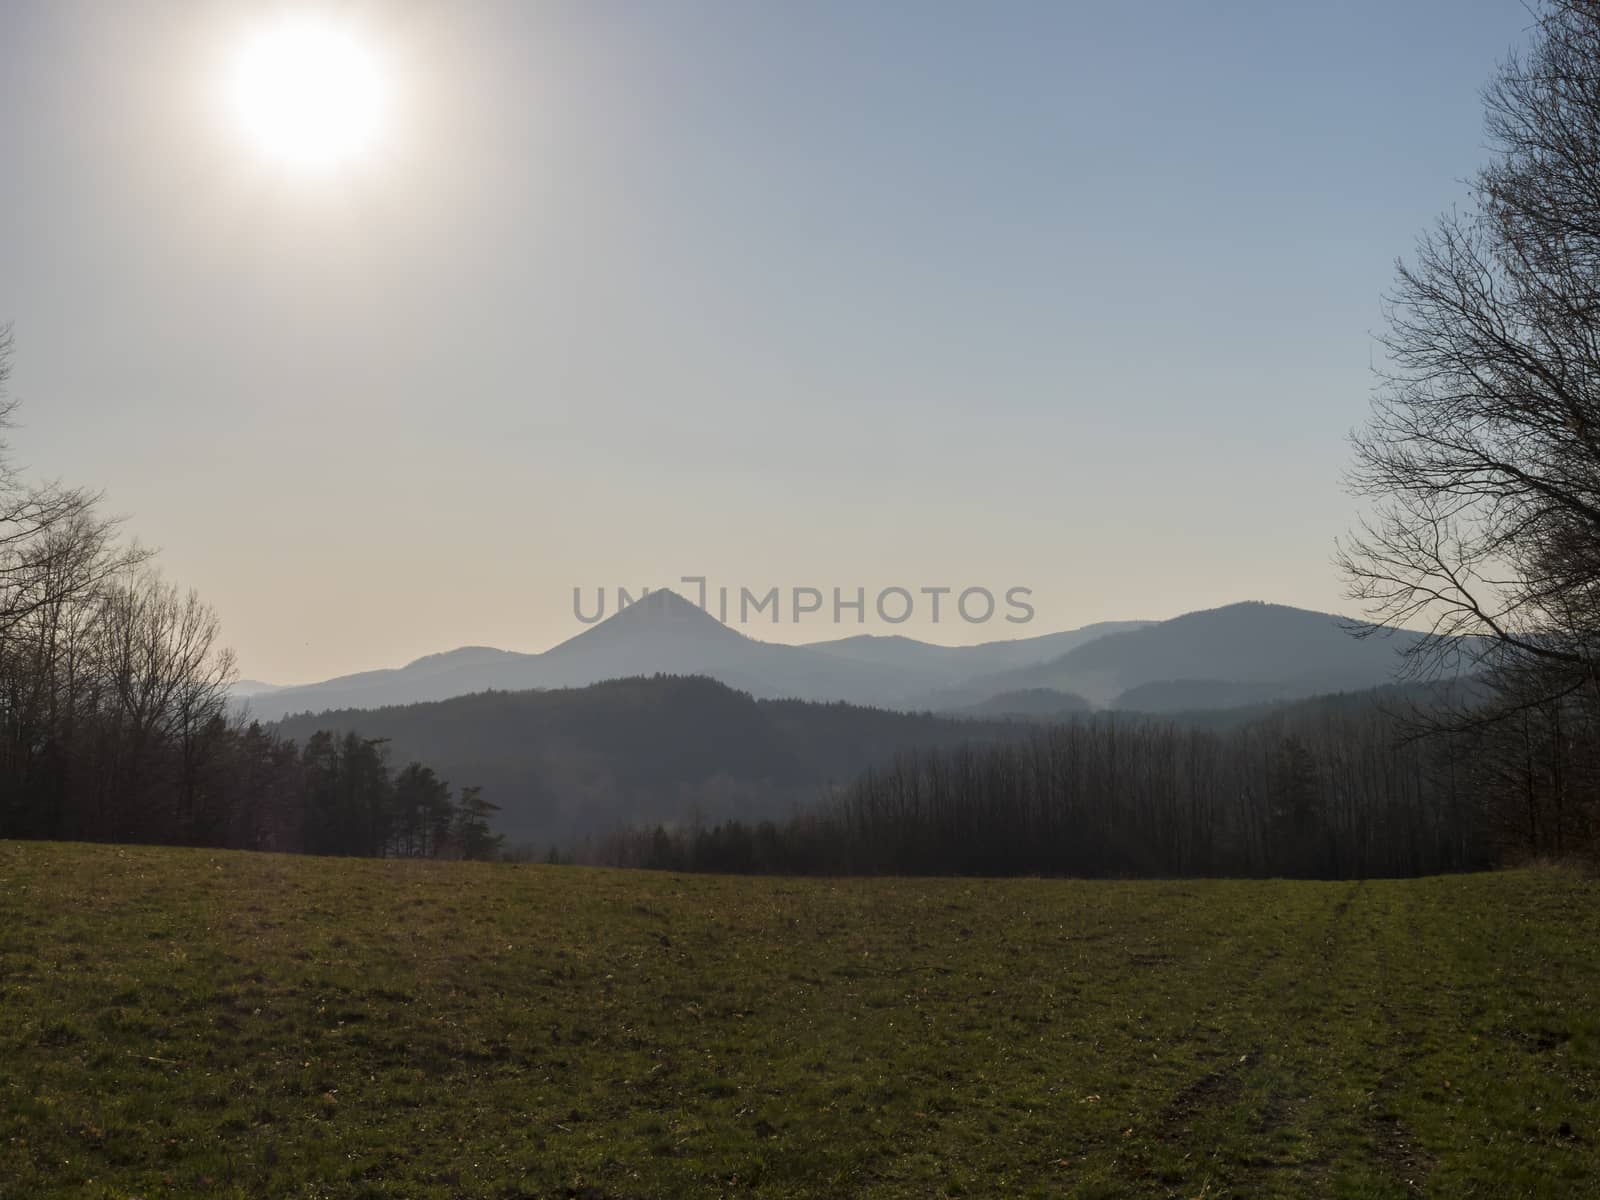 early spring landscape at Lusatian mountains, with view point hill klic, grass meadow, bare trees, deciduous and spruce tree forest, clear blue sky background, golden hour light, horizontal, copy space.